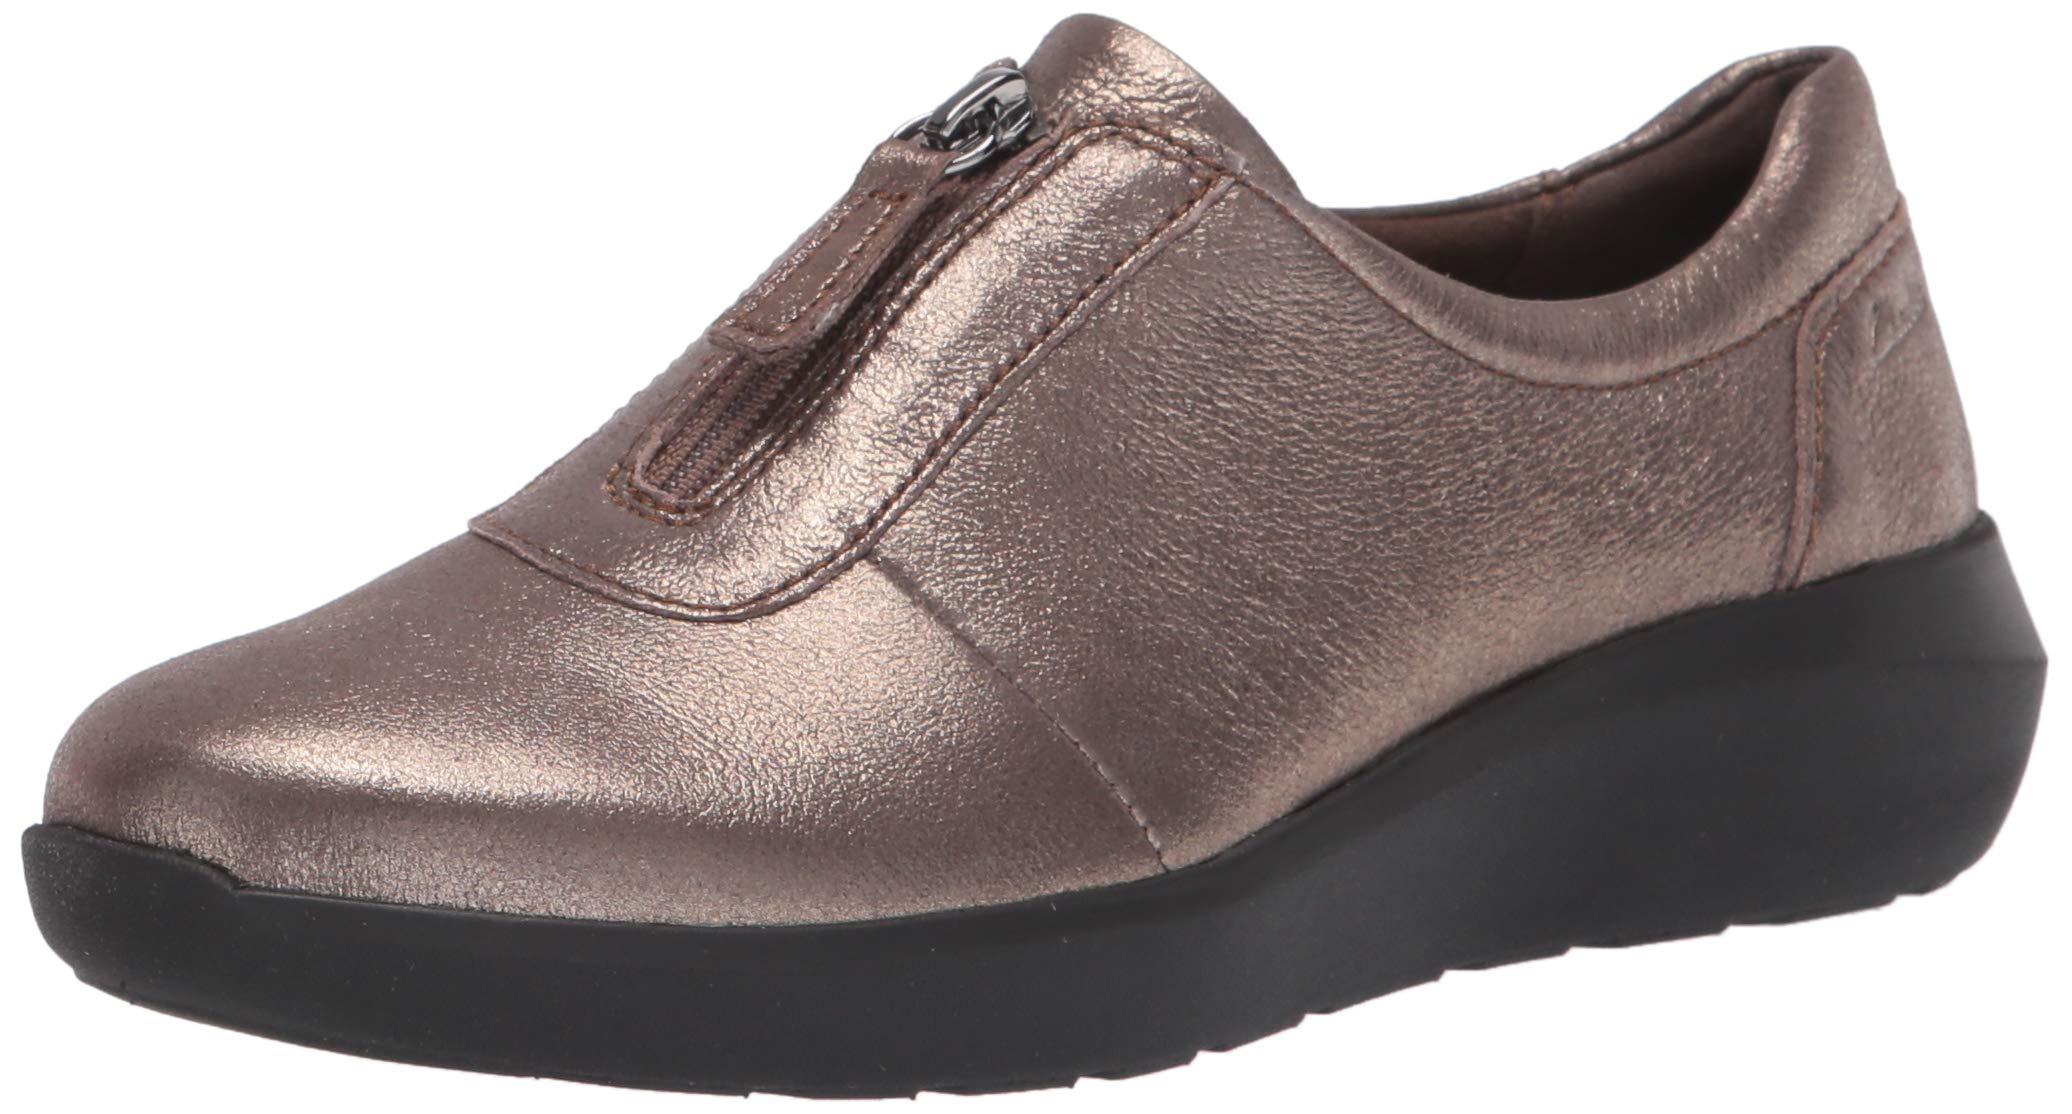 US Clarks Women's Kayleigh River Loafer 